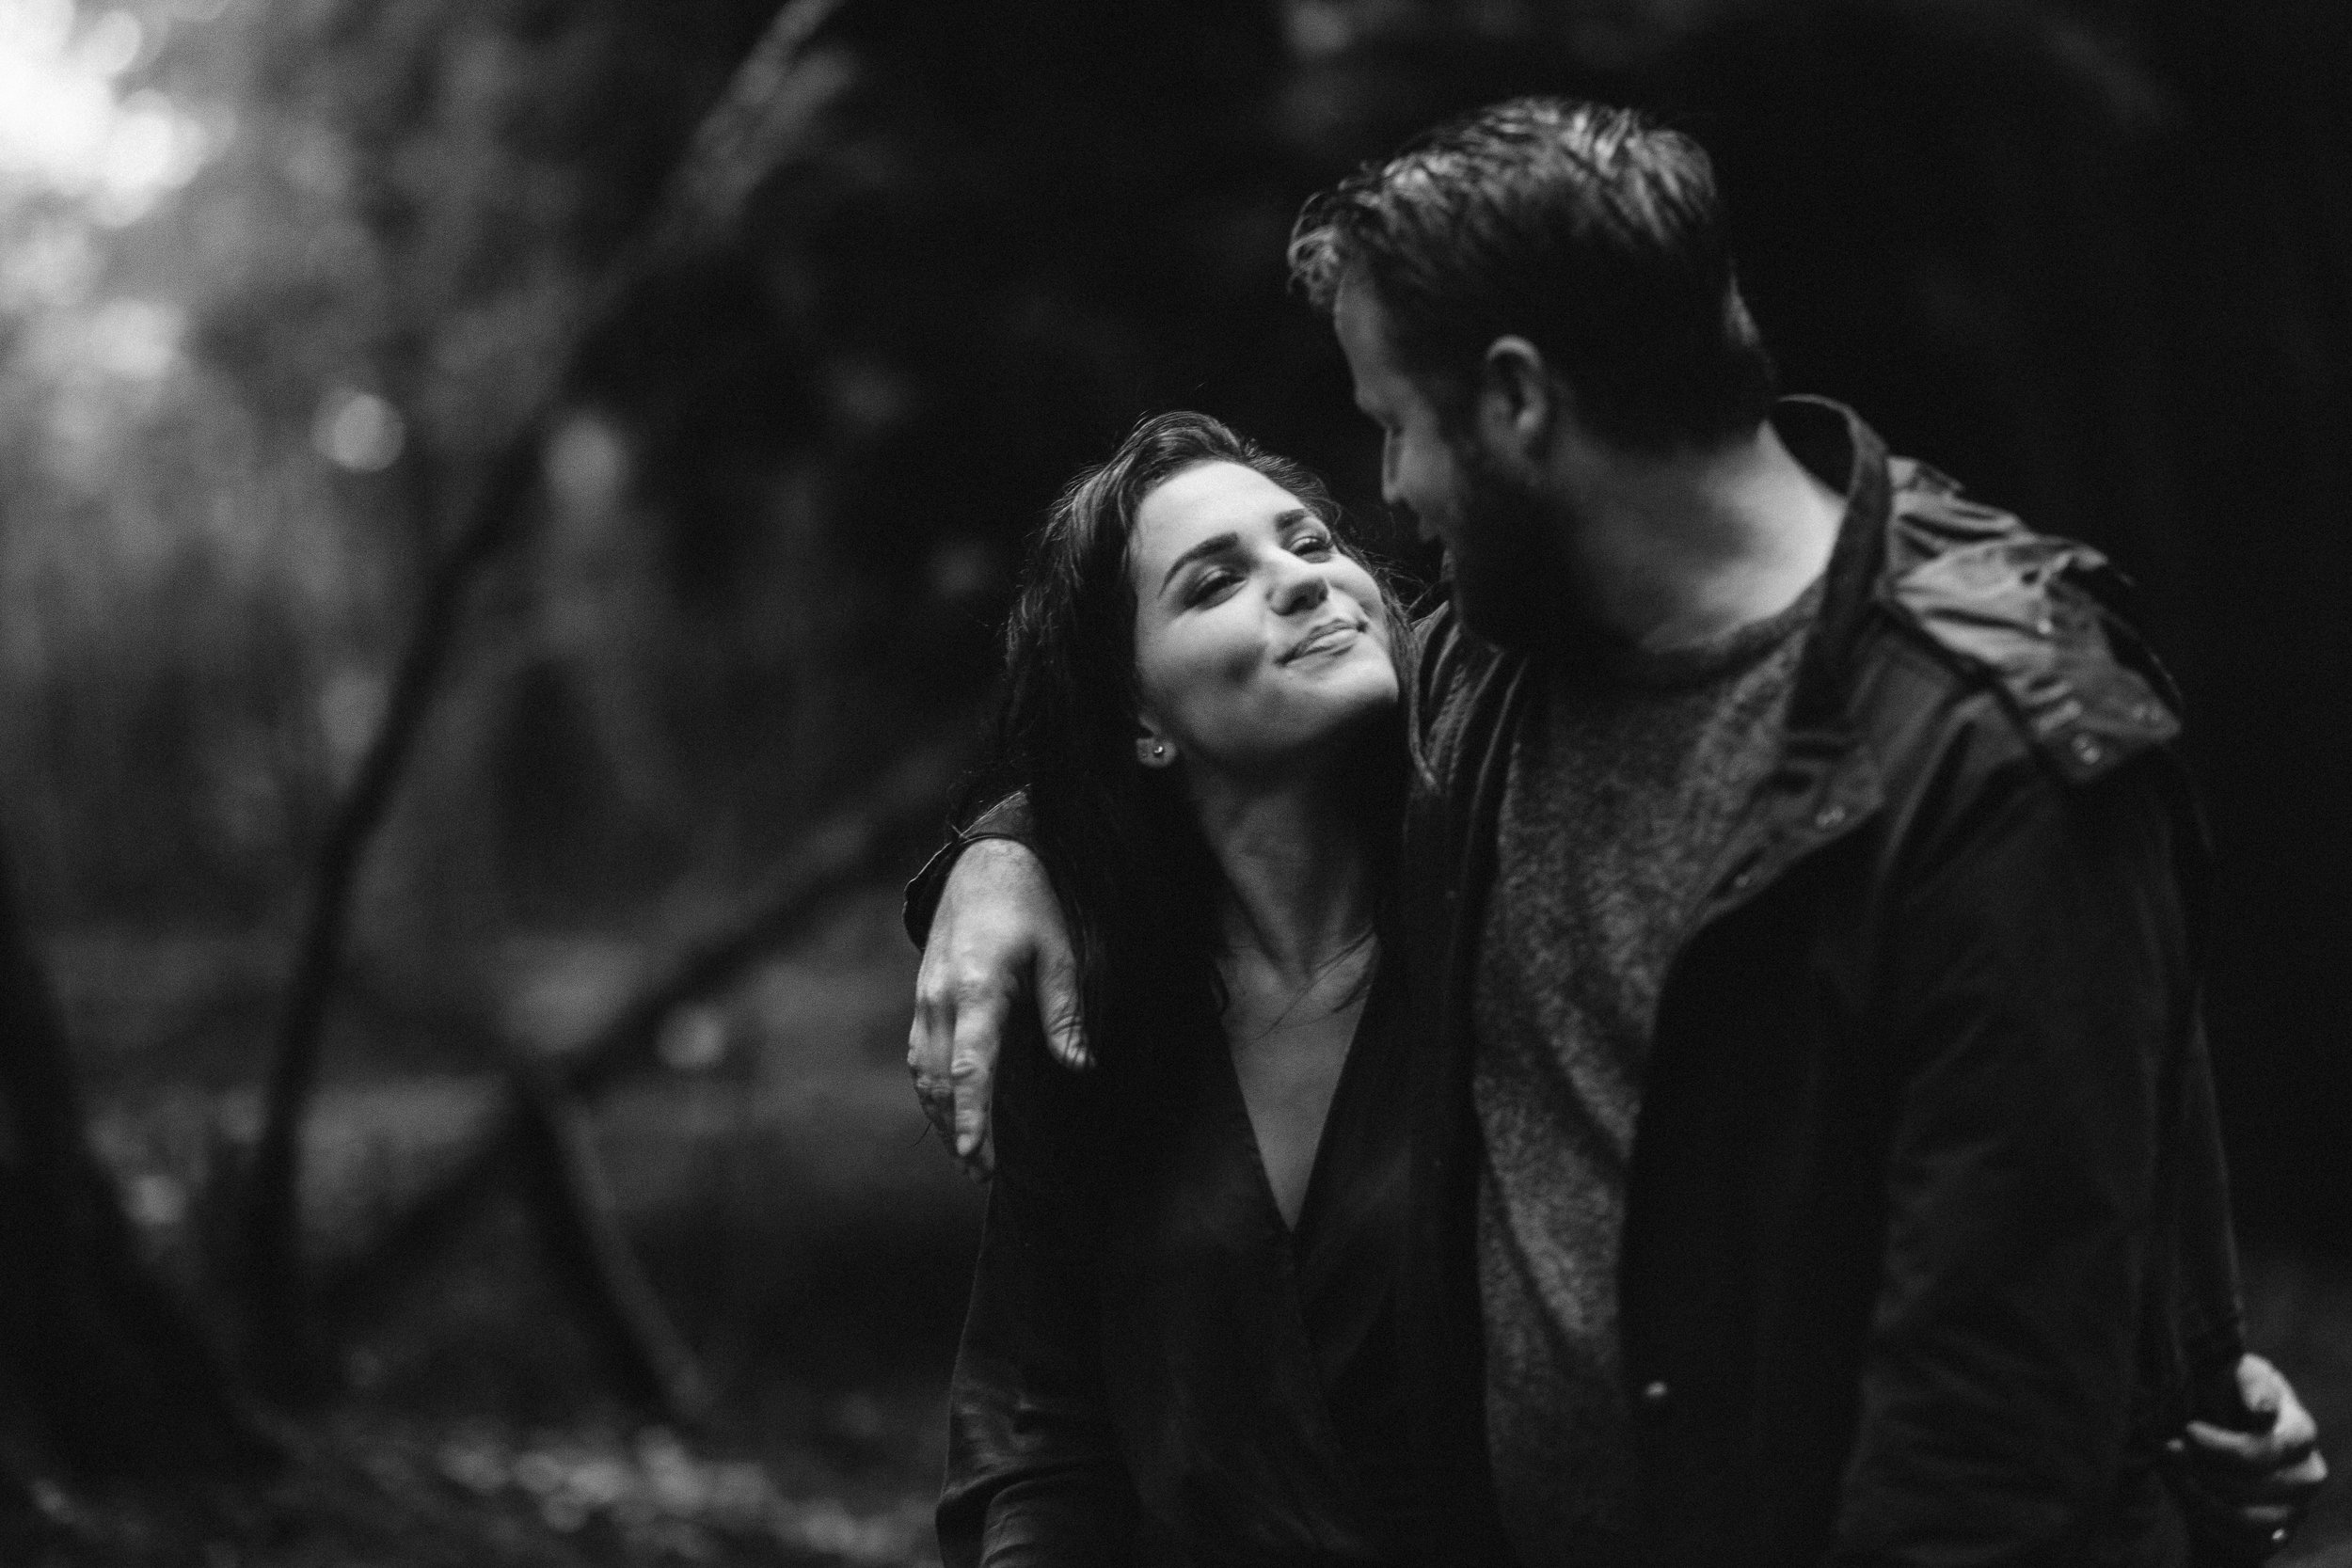 nicole-daacke-photography-redwoods-national-park-forest-rainy-foggy-adventure-engagement-session-humboldt-county-old-growth-redwood-tree-elopement-intimate-wedding-photographer-36.jpg